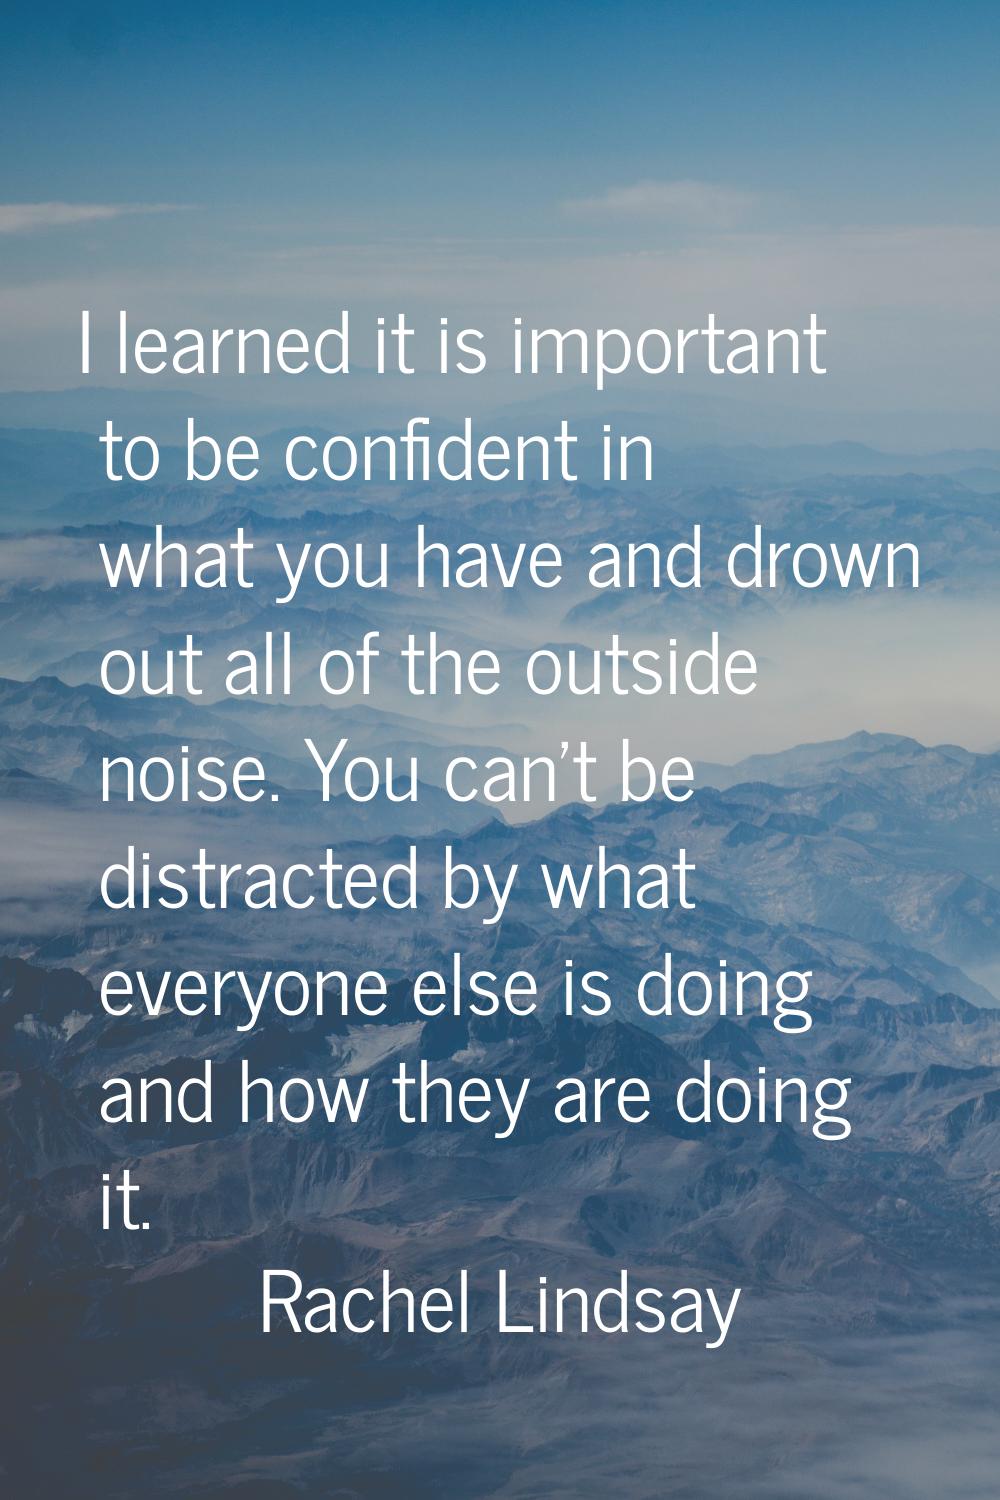 I learned it is important to be confident in what you have and drown out all of the outside noise. 